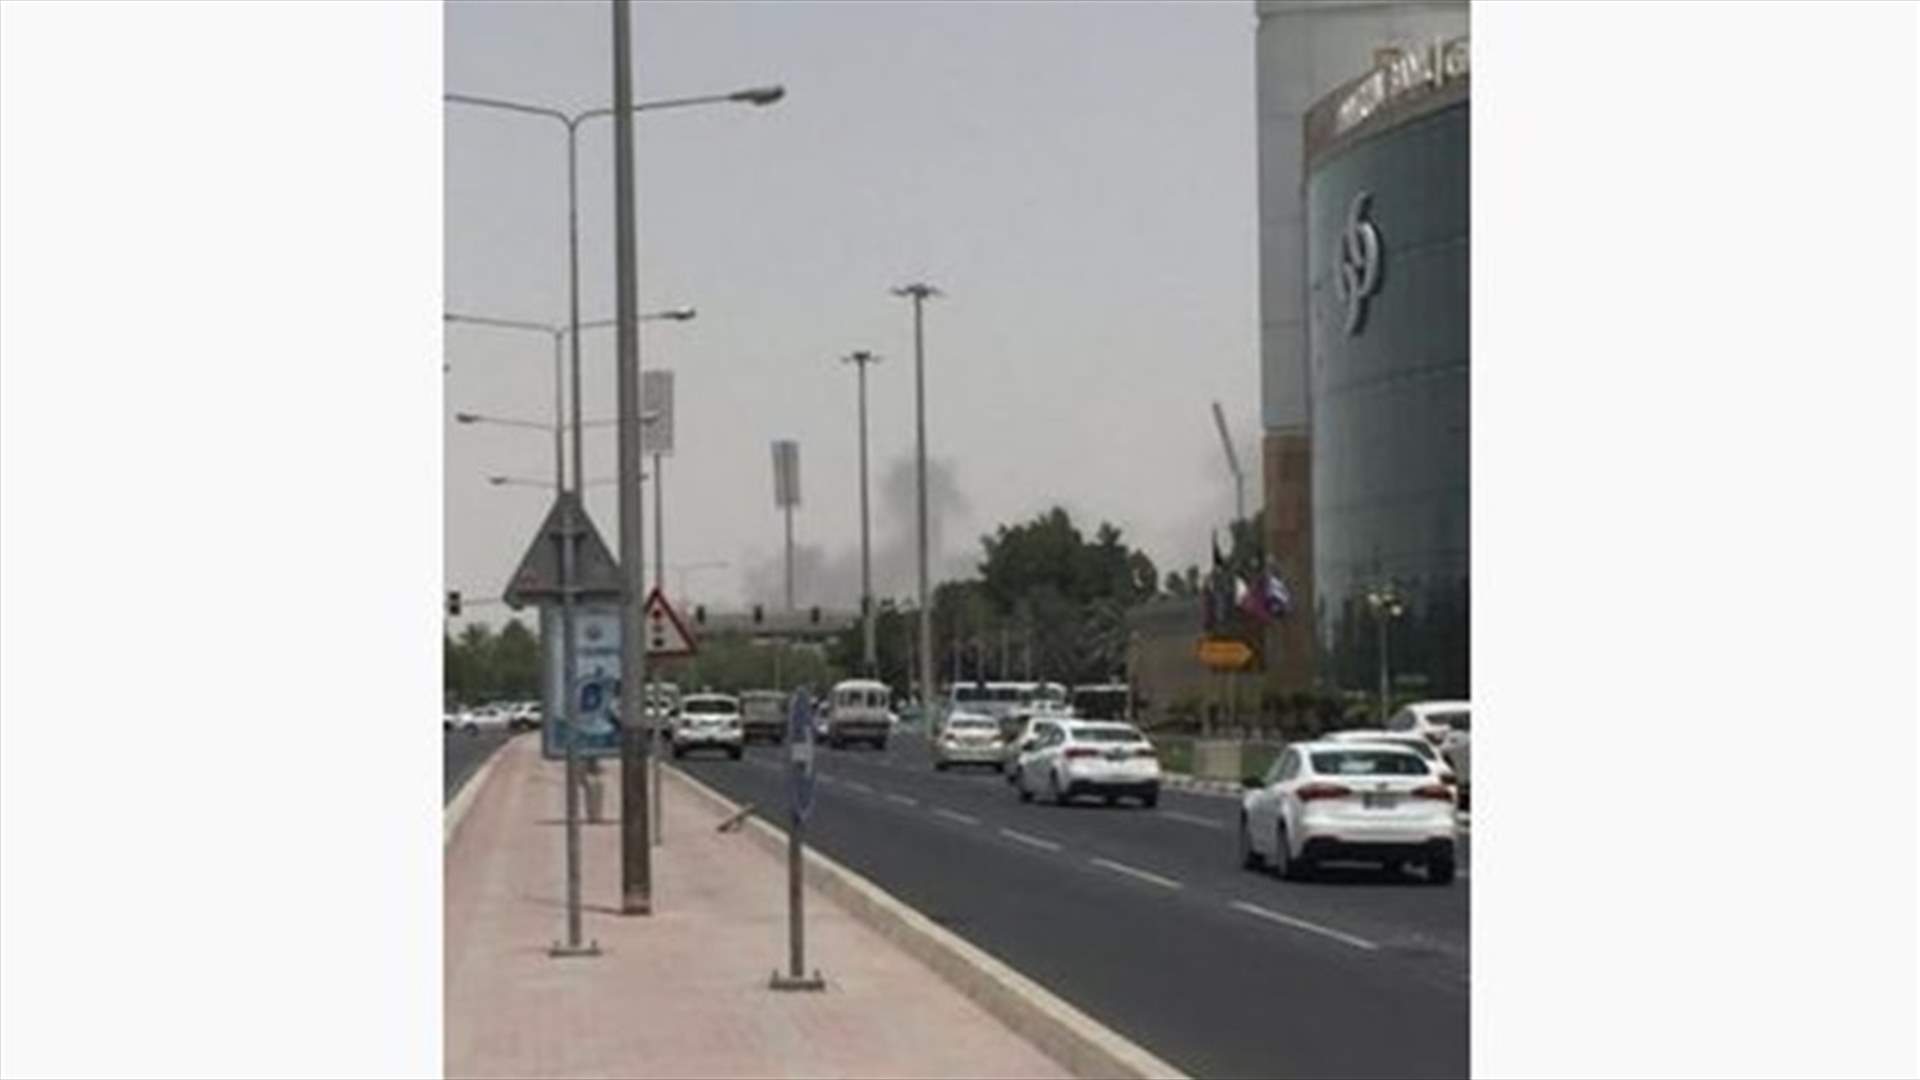 Another mall being built in Qatar&#39;s capital catches fire